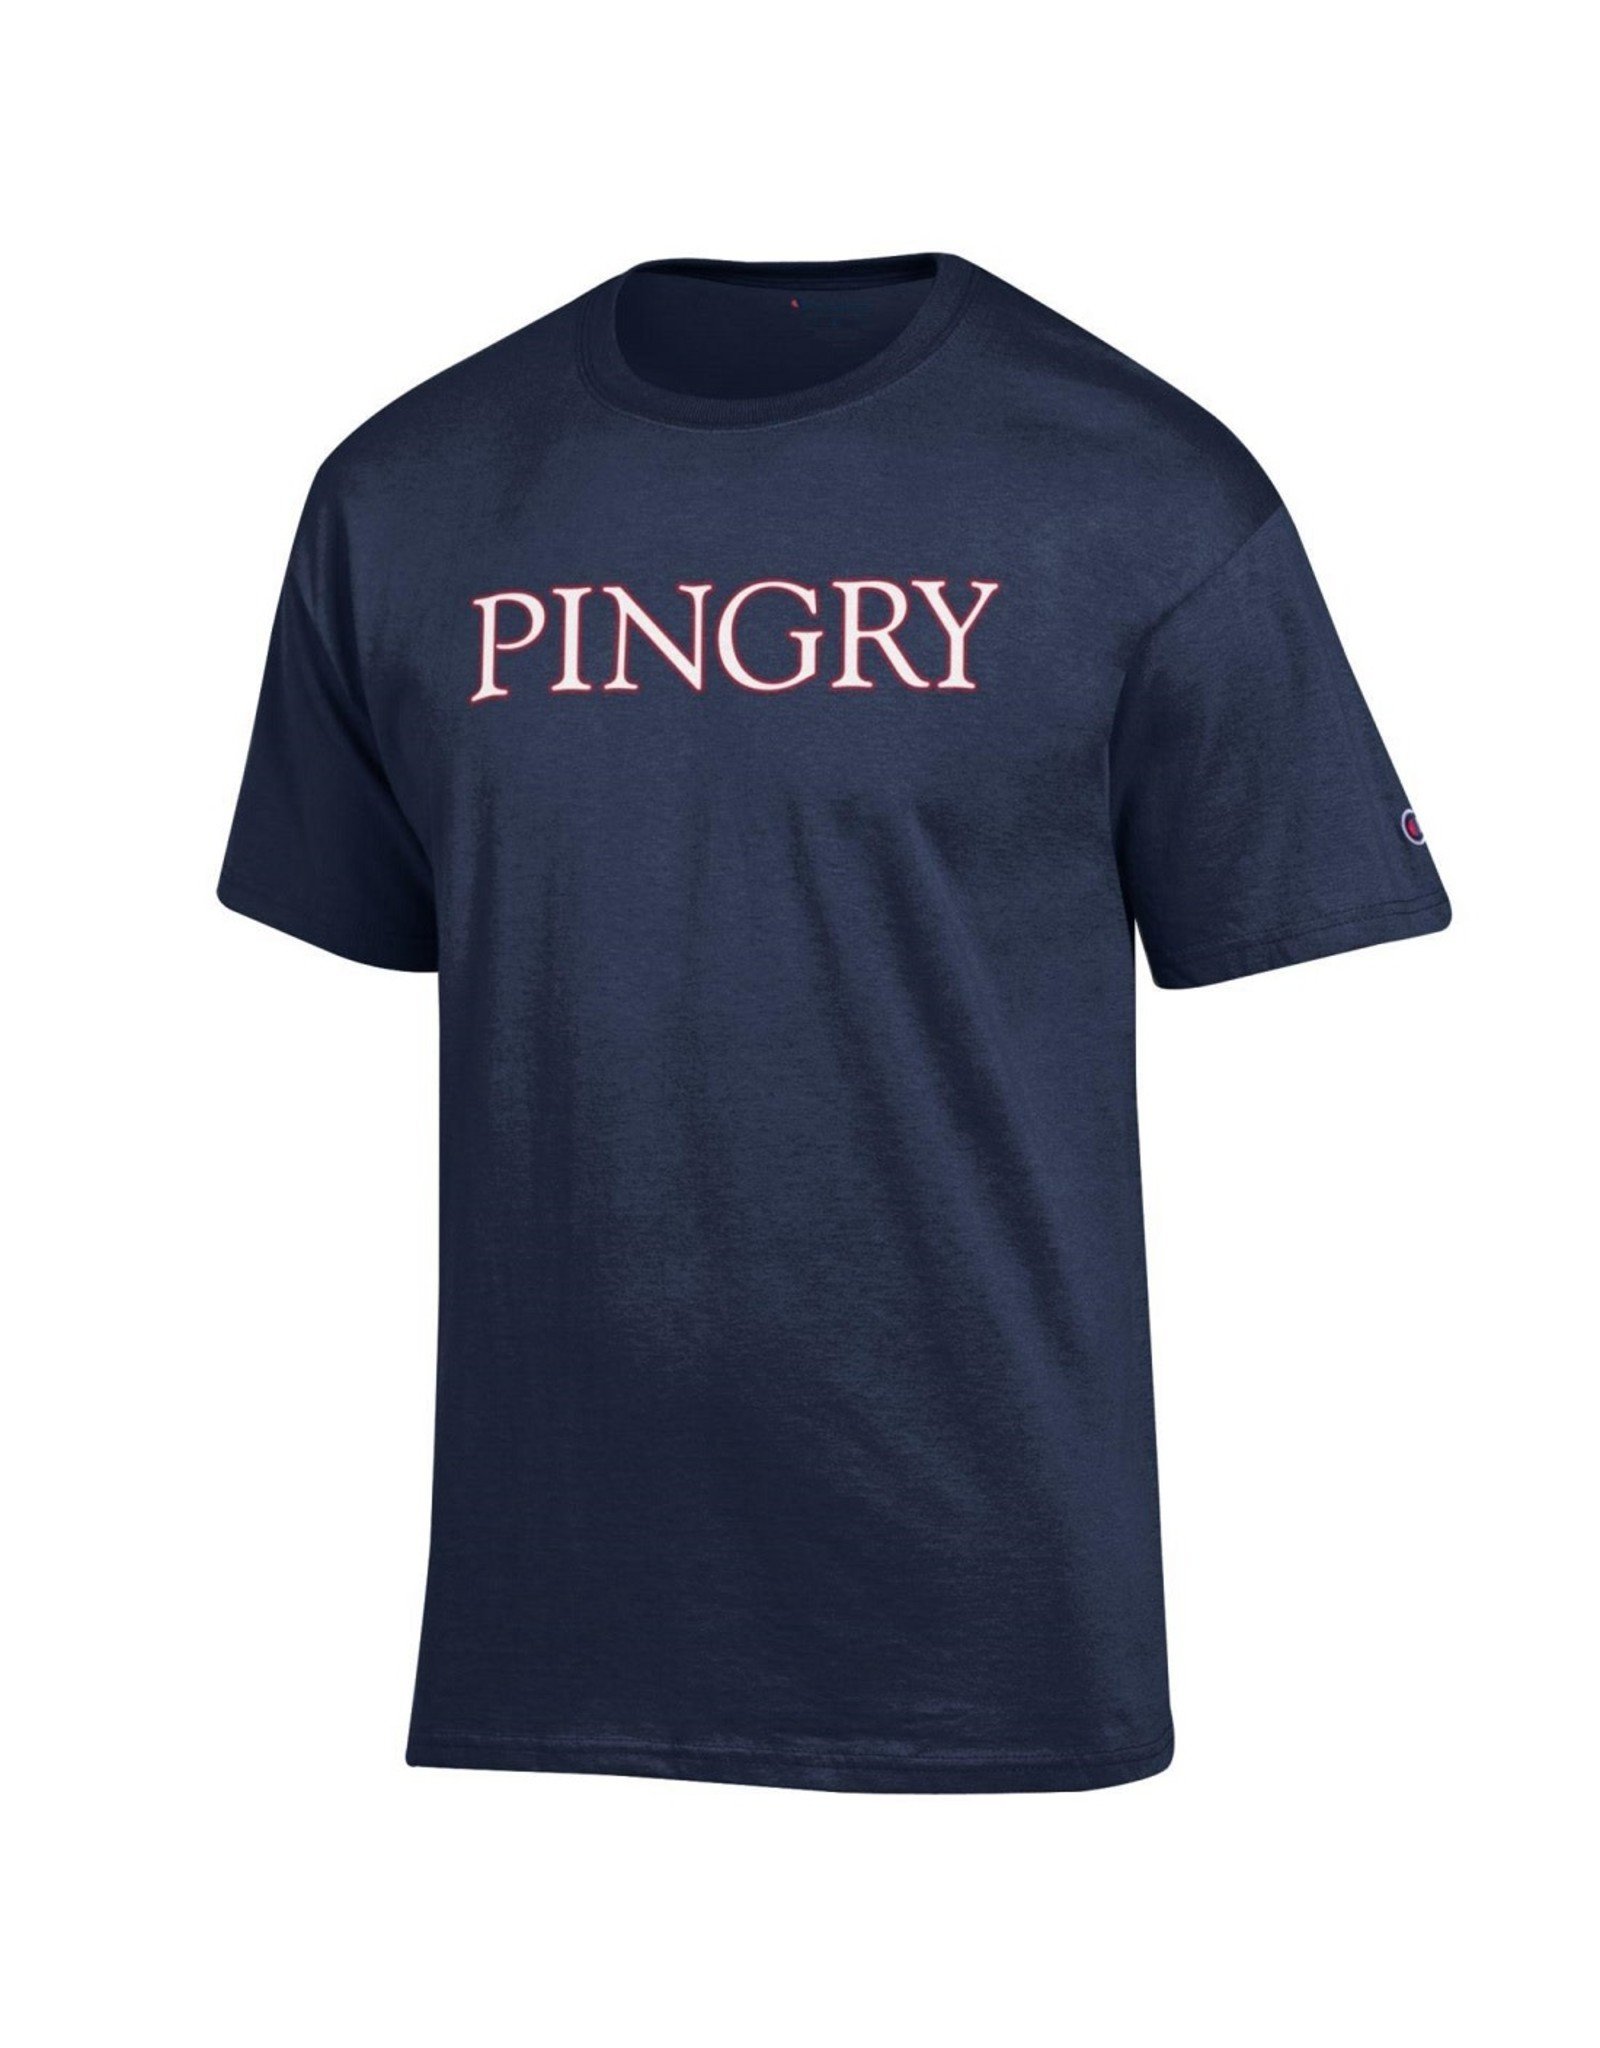 Basic Tee with Pingry logo